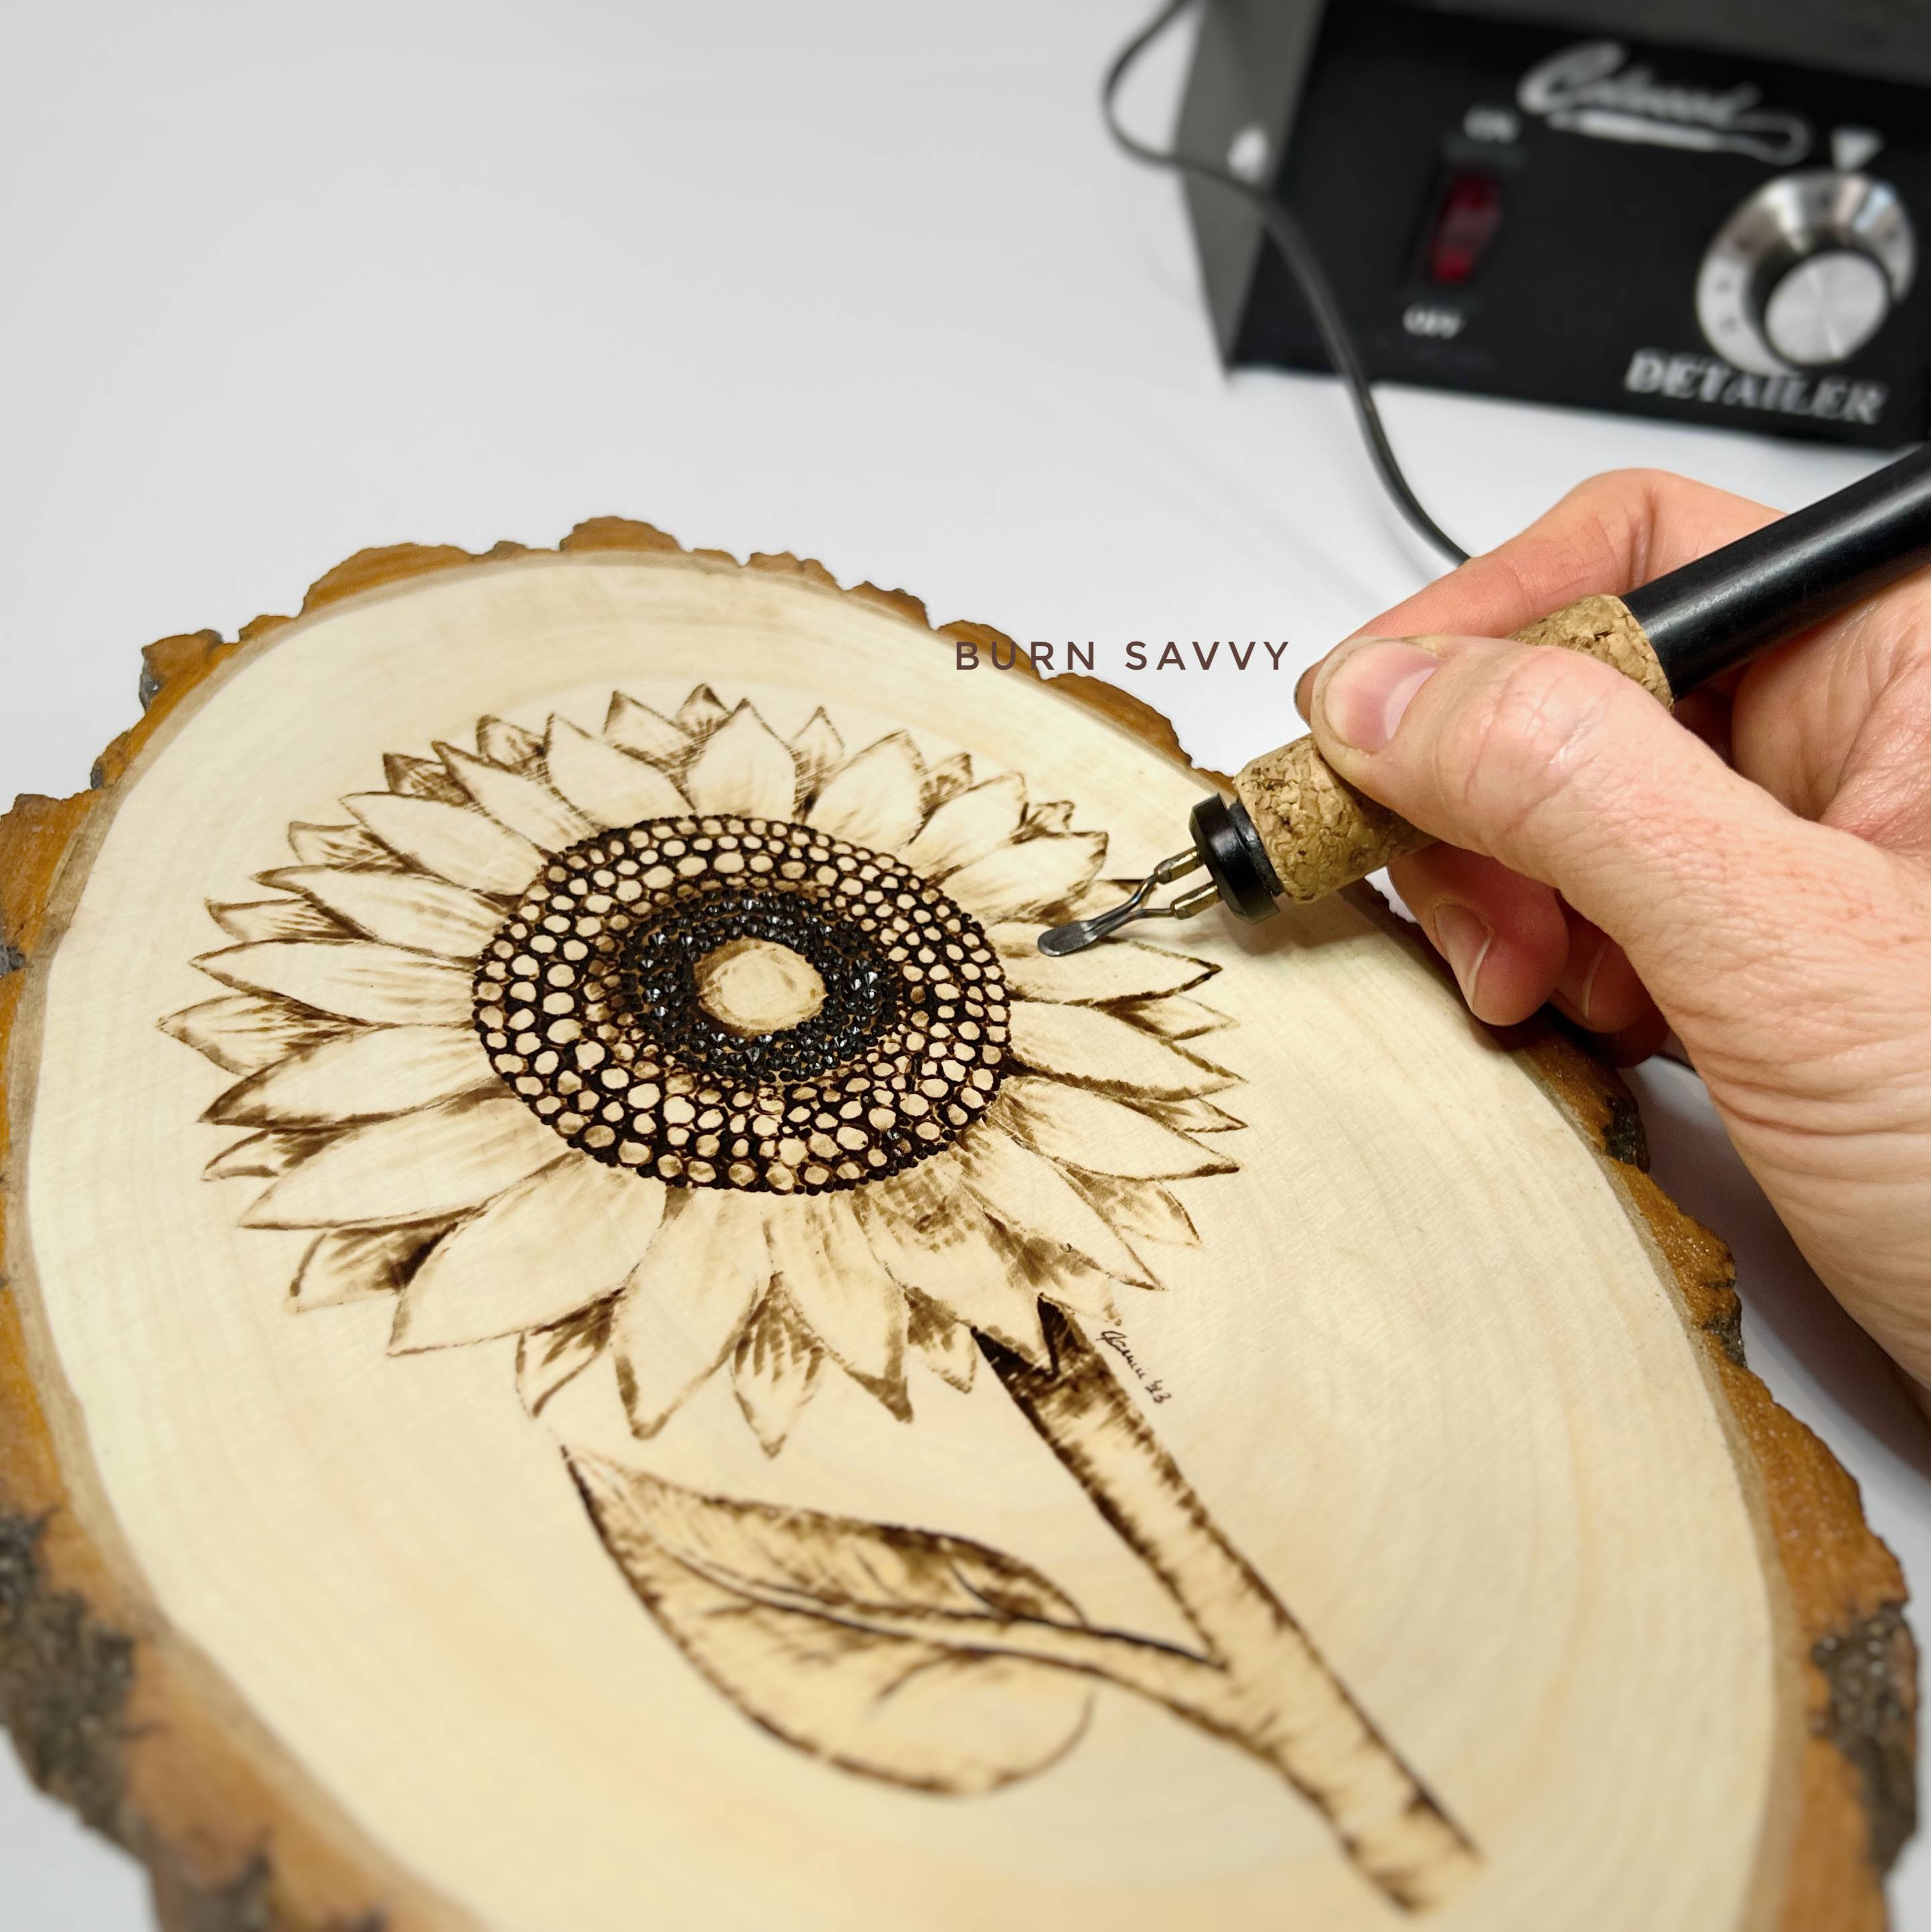 Learn to burn! Get started with Woodburning - C&T Publishing